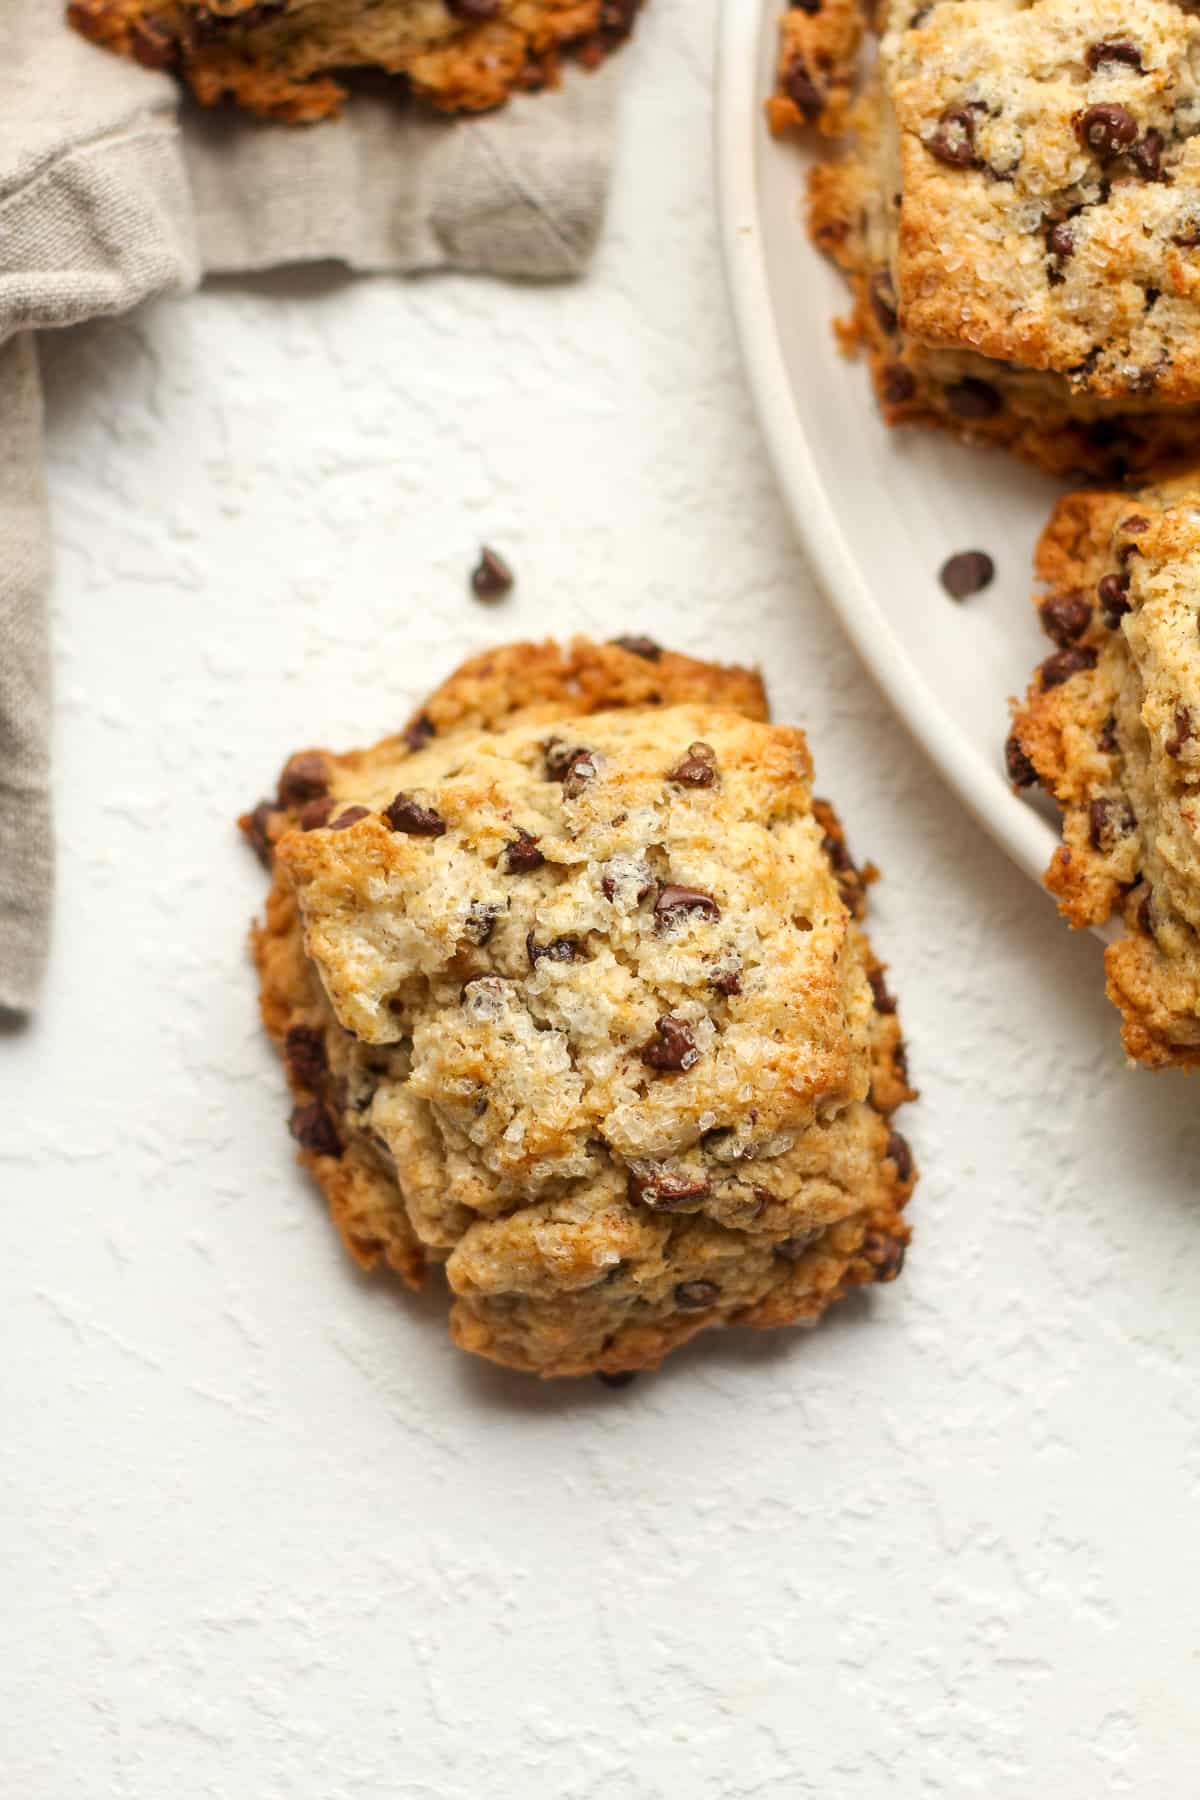 A chocolate chip scone next to a plate of scones.